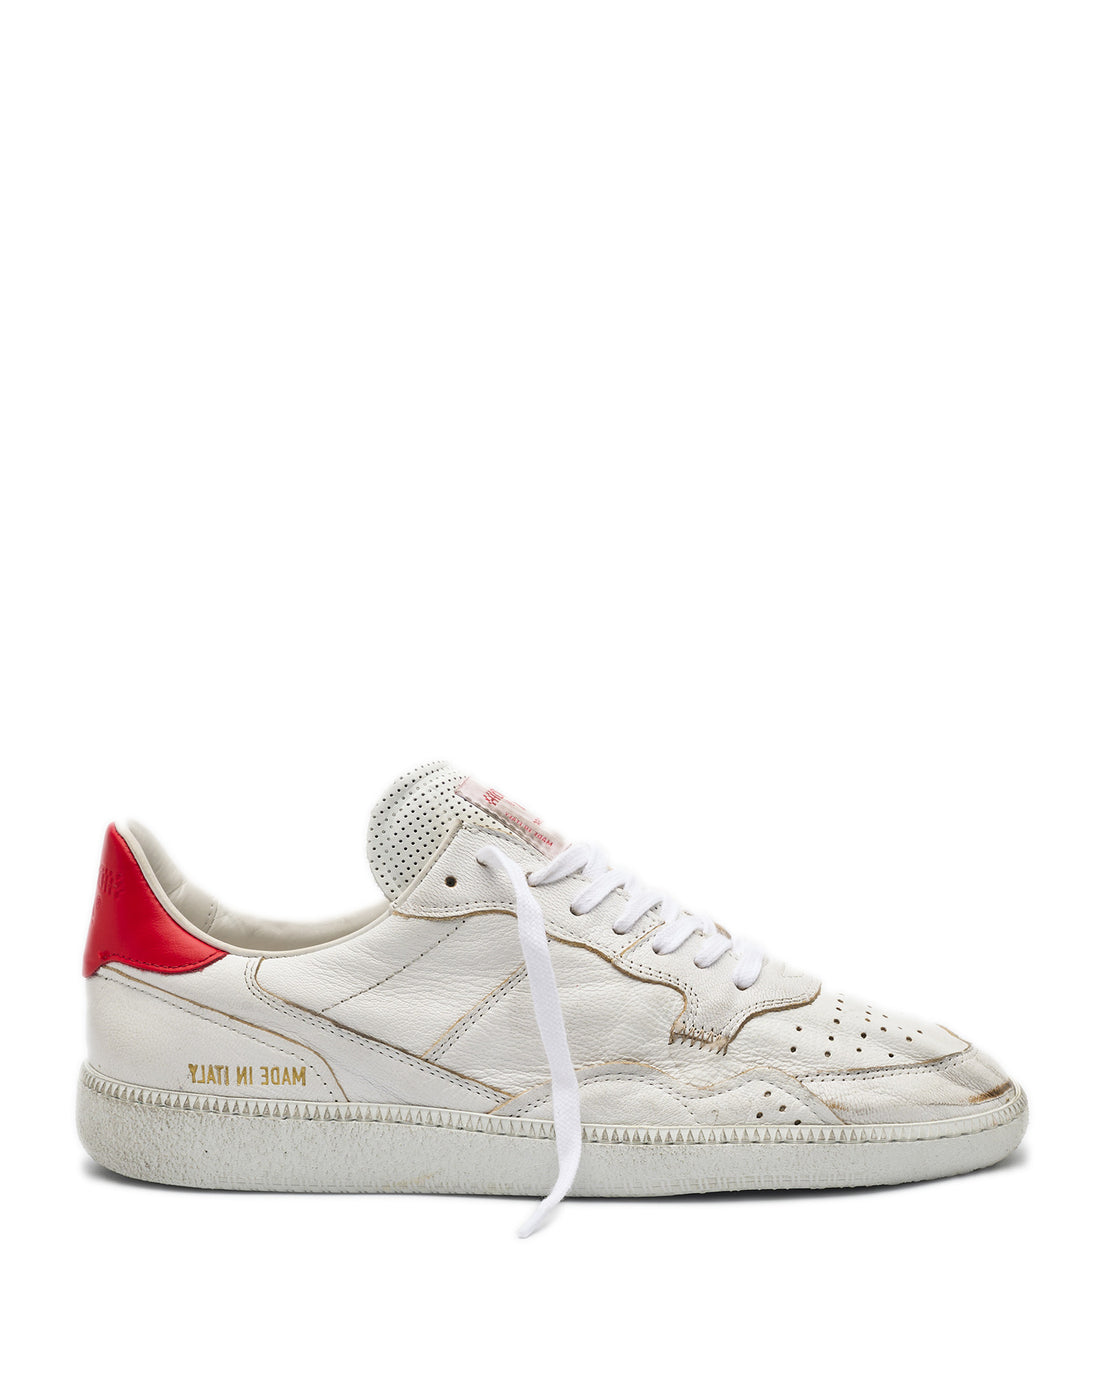 HIDNANDER Sneakers Mega T White/Red